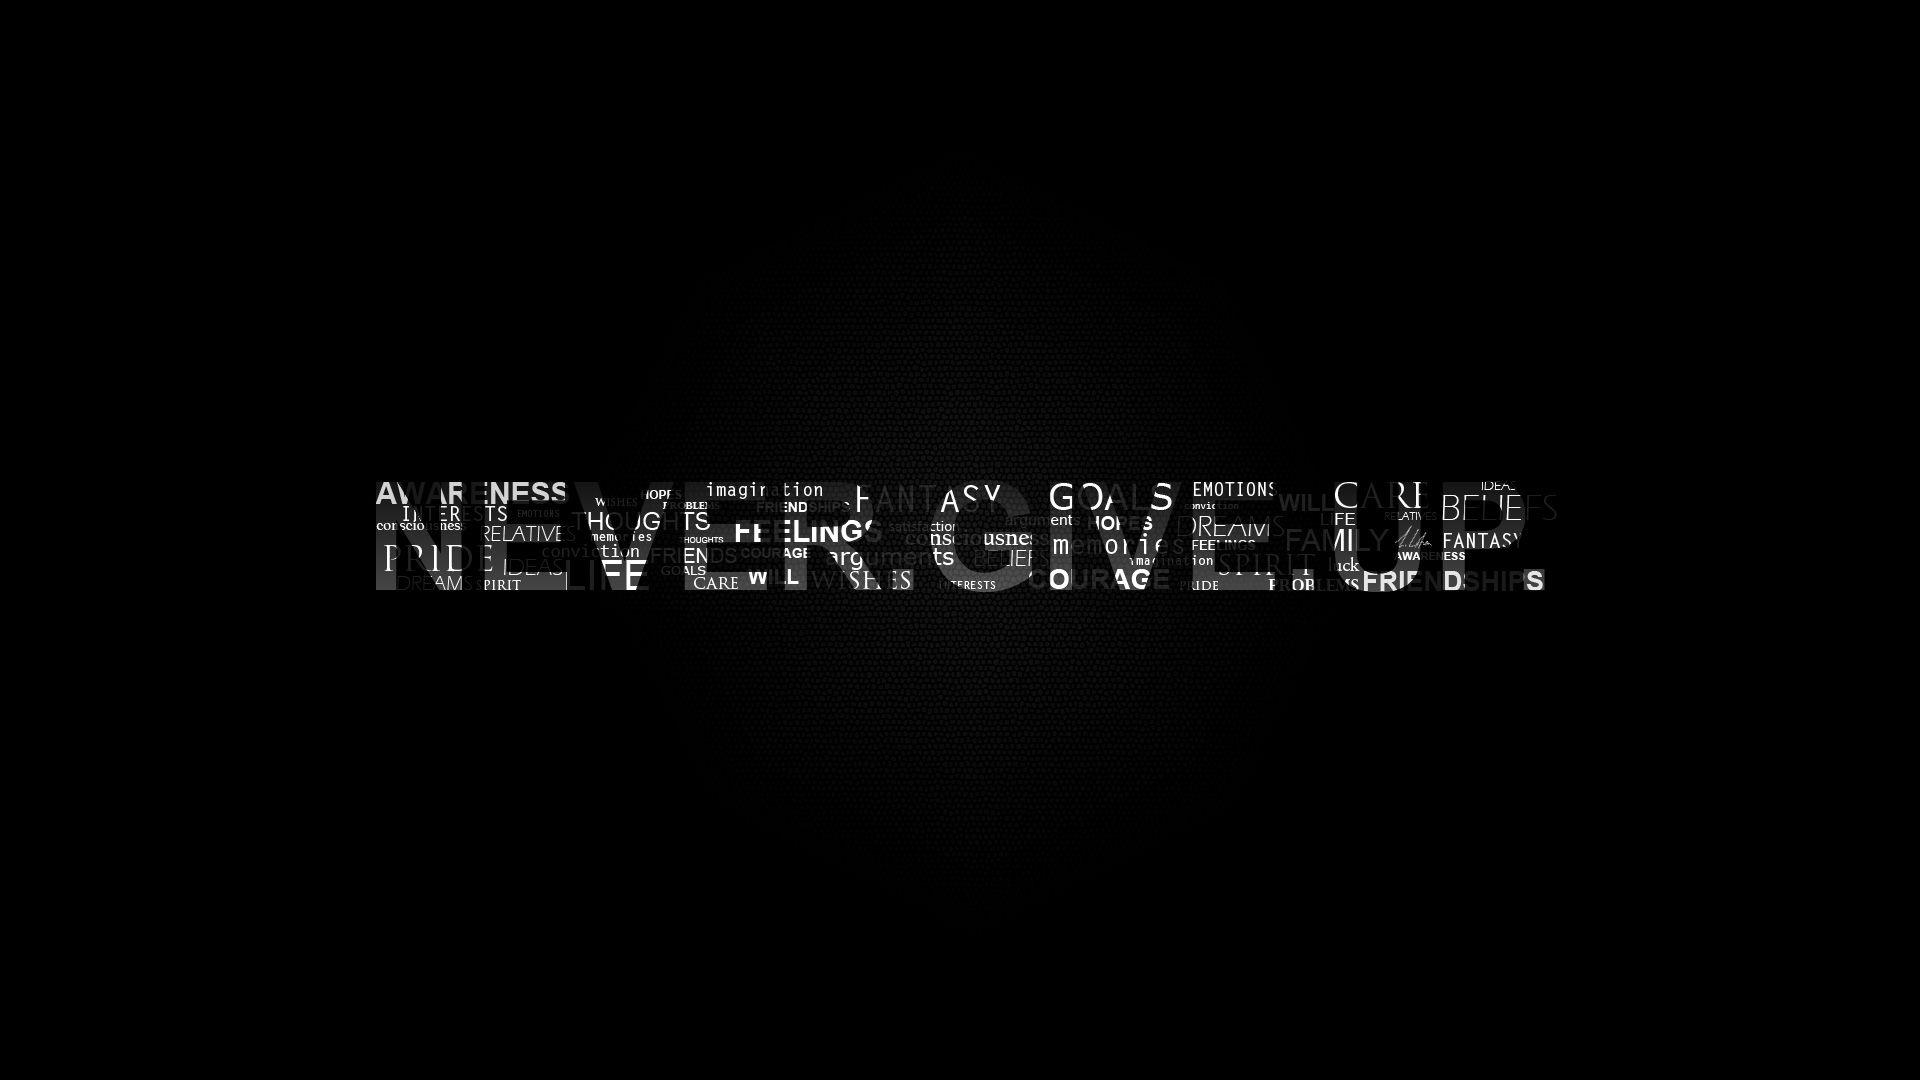 Never Give Up Because Great Things Take Time Wallpaper